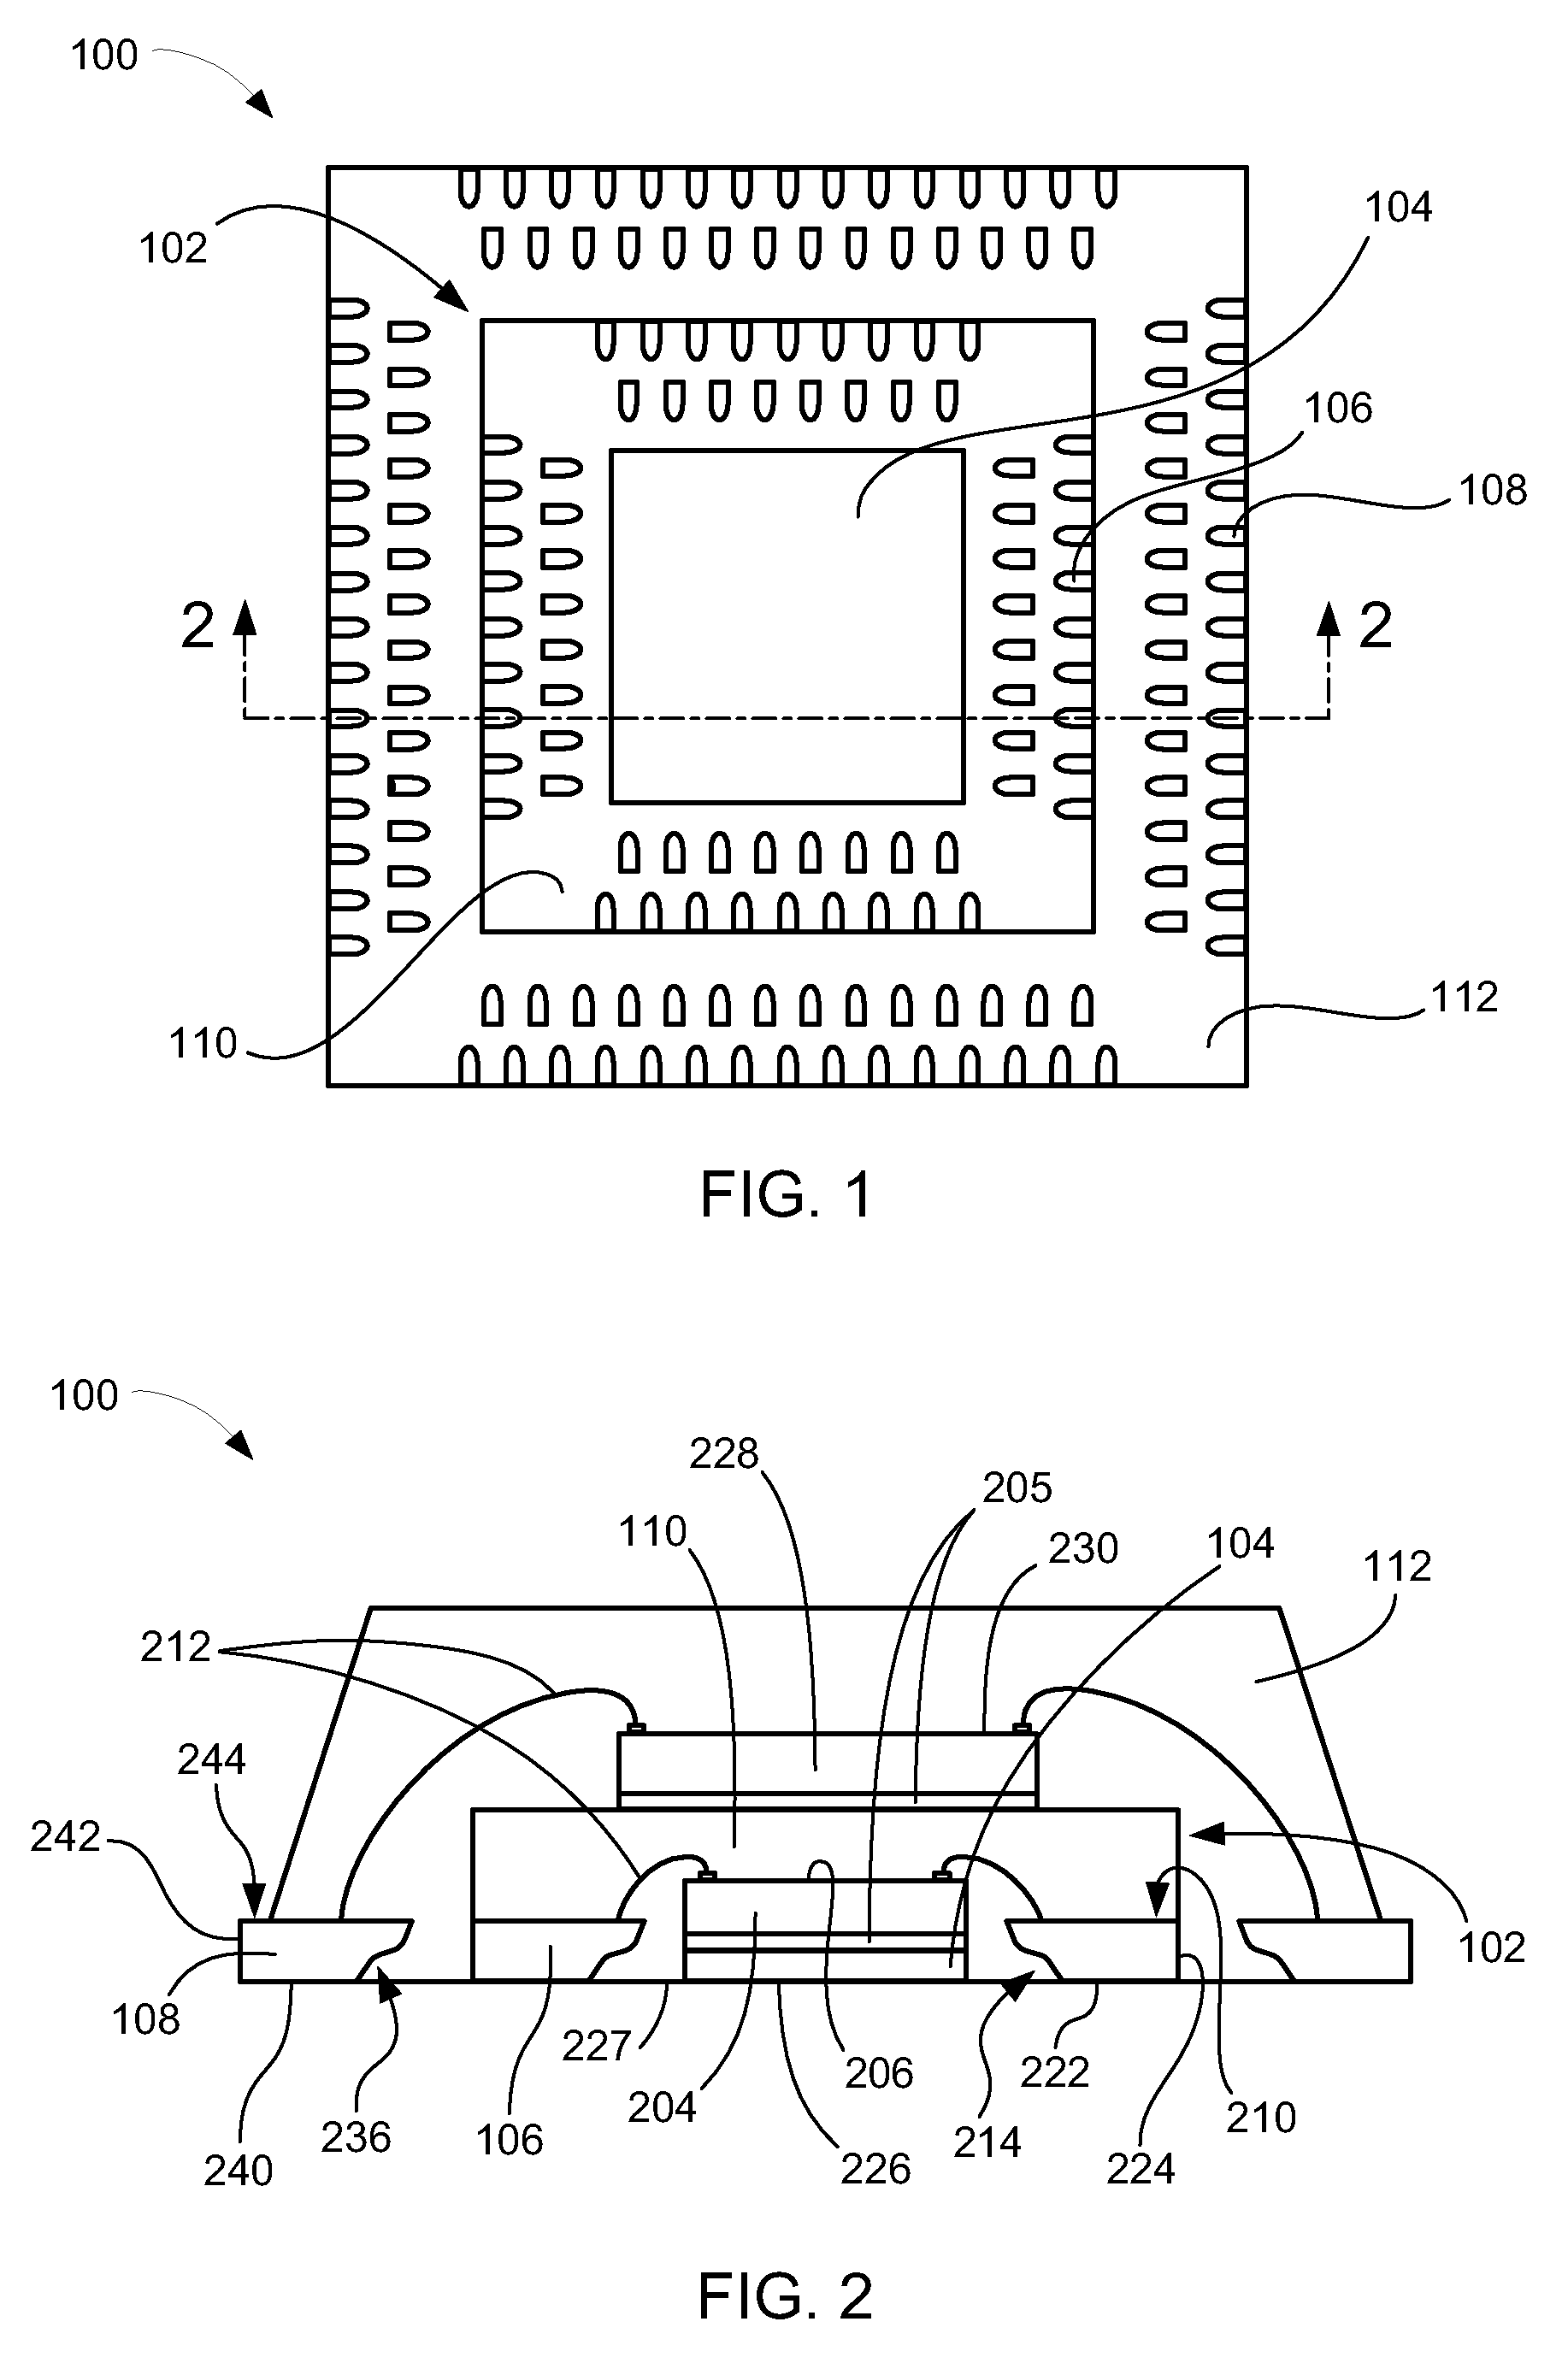 Quad flat pack in quad flat pack integrated circuit package system